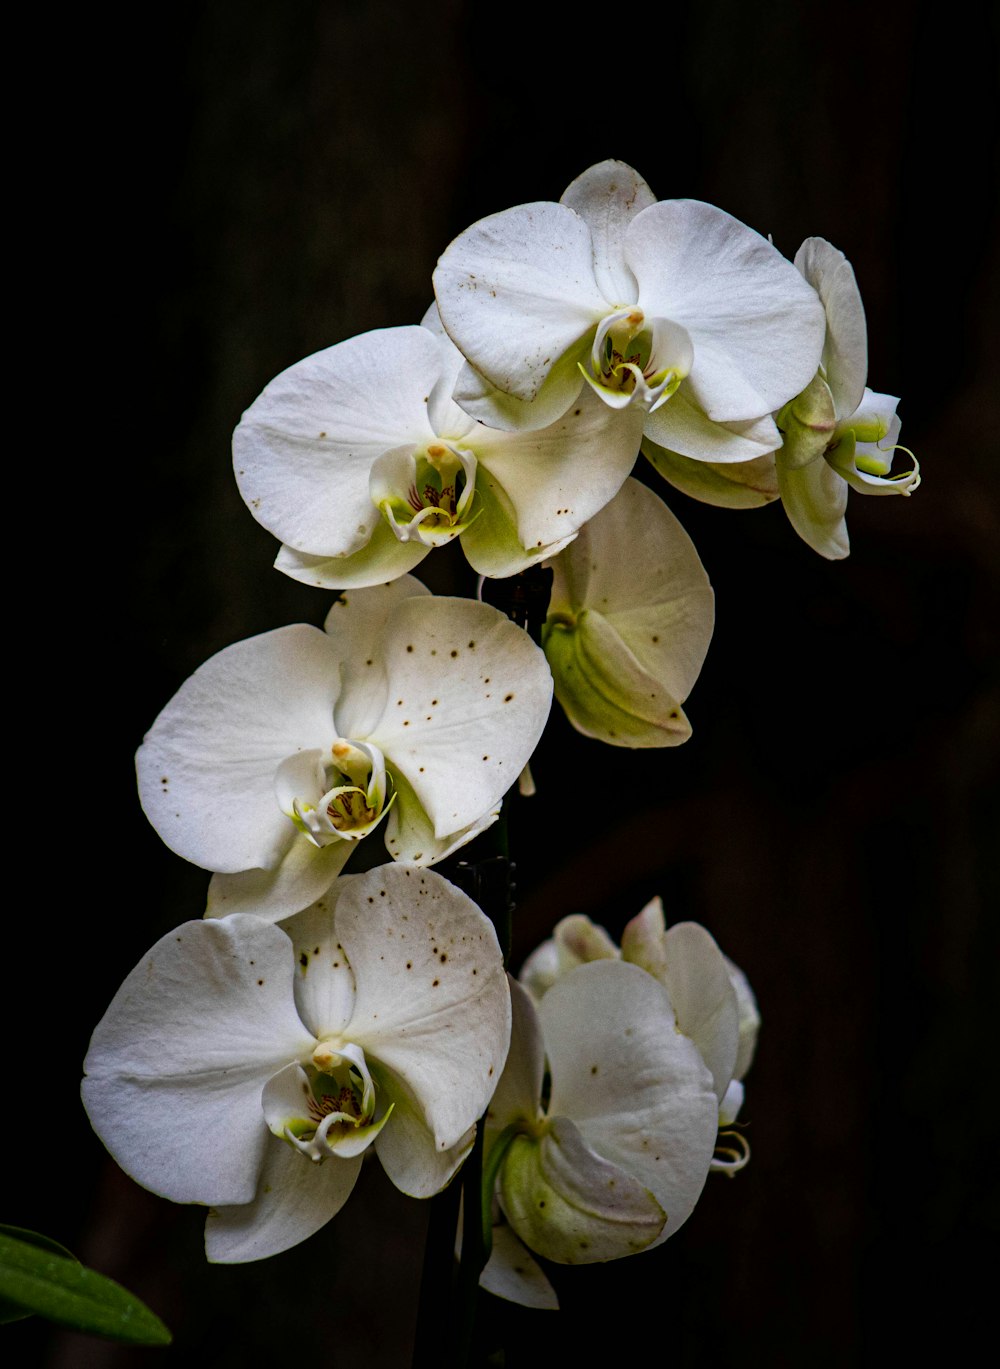 a close-up of white flowers